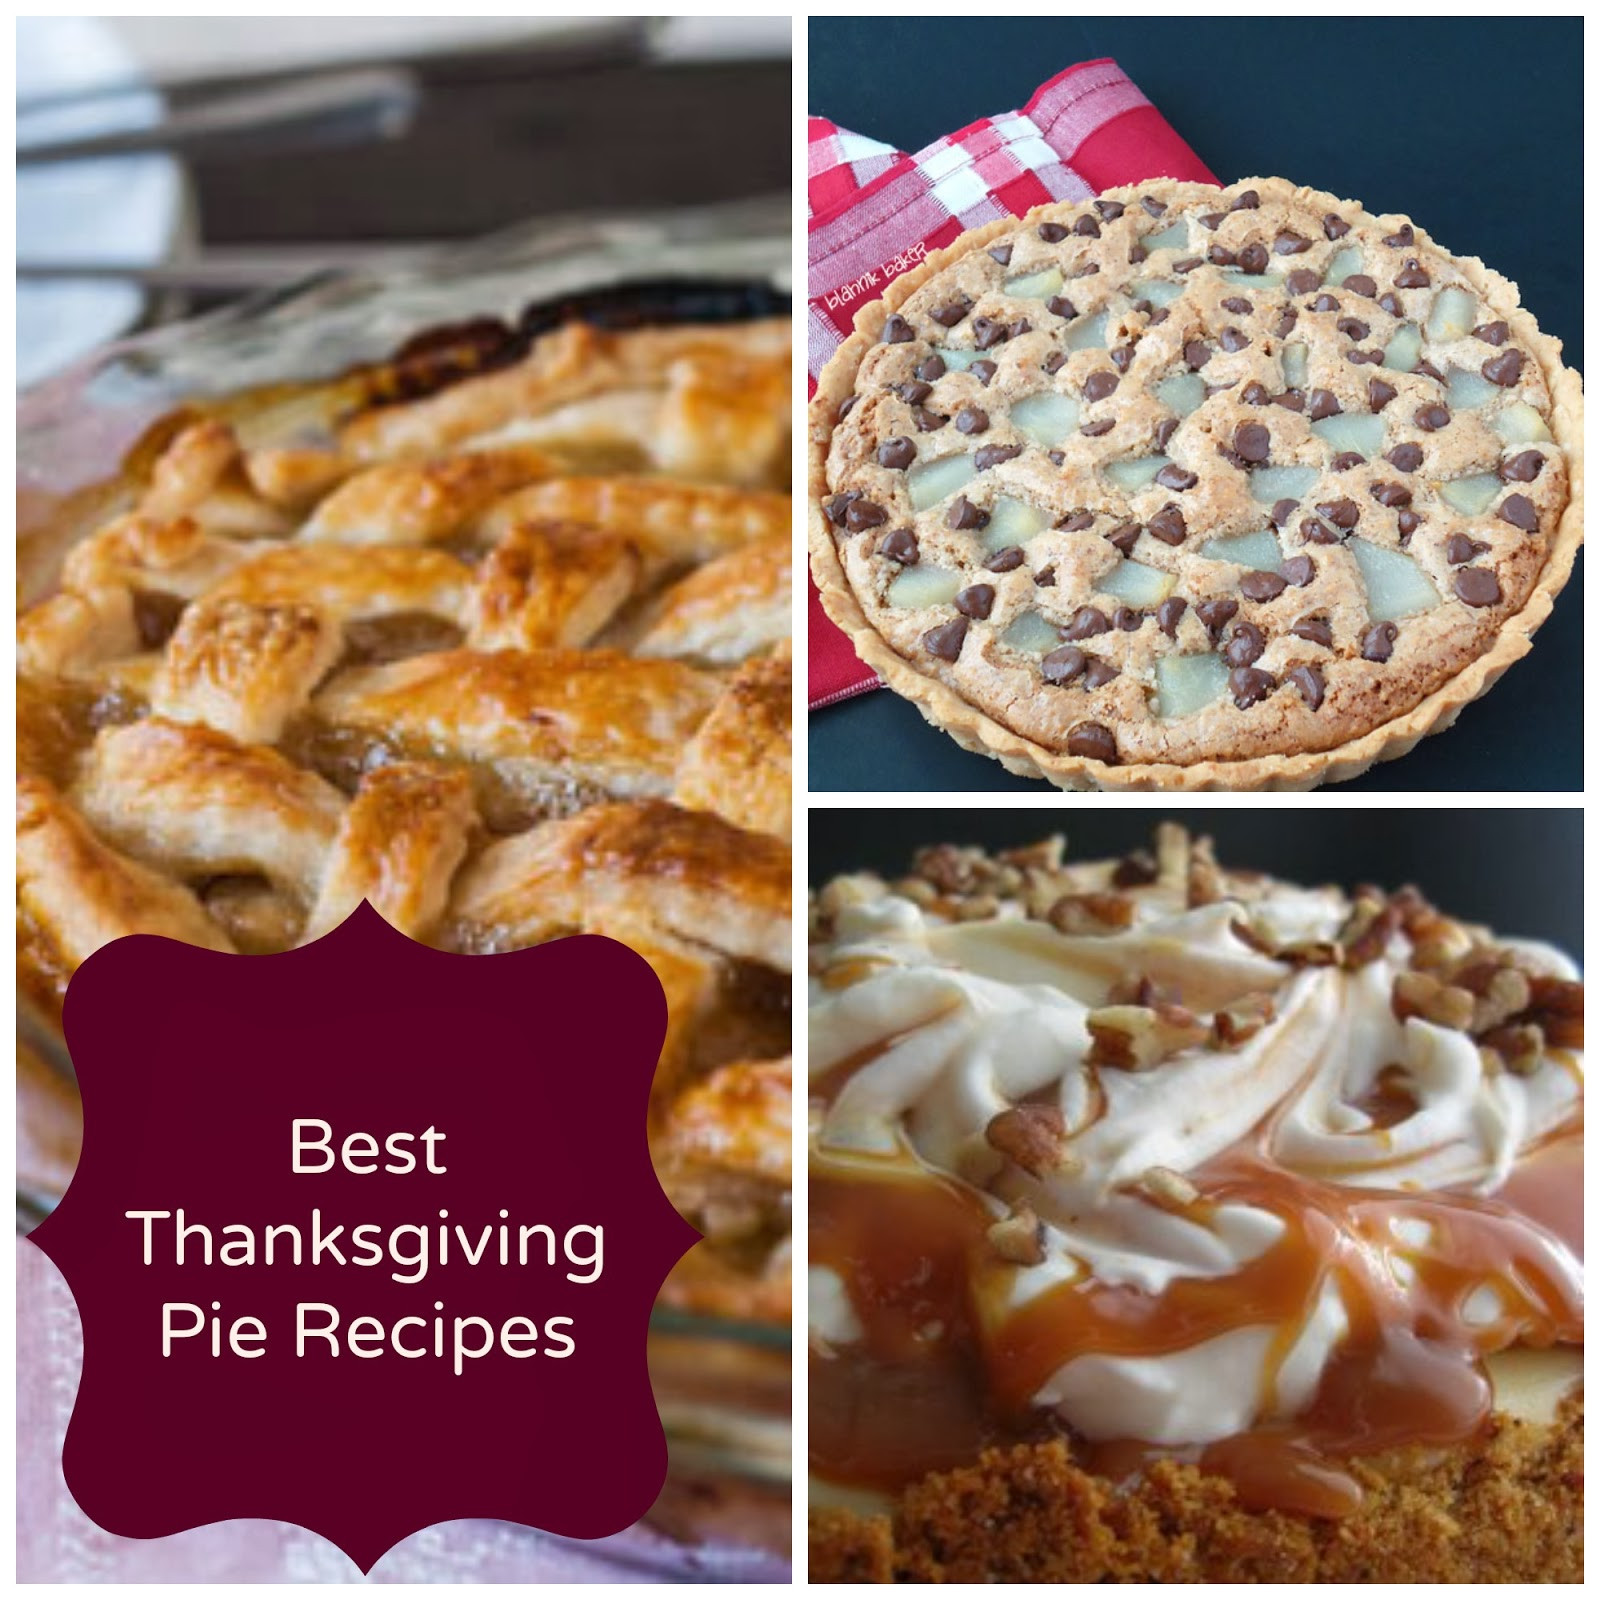 Best Pies For Thanksgiving
 Decorating Pennies Best Thanksgiving Pie Recipes